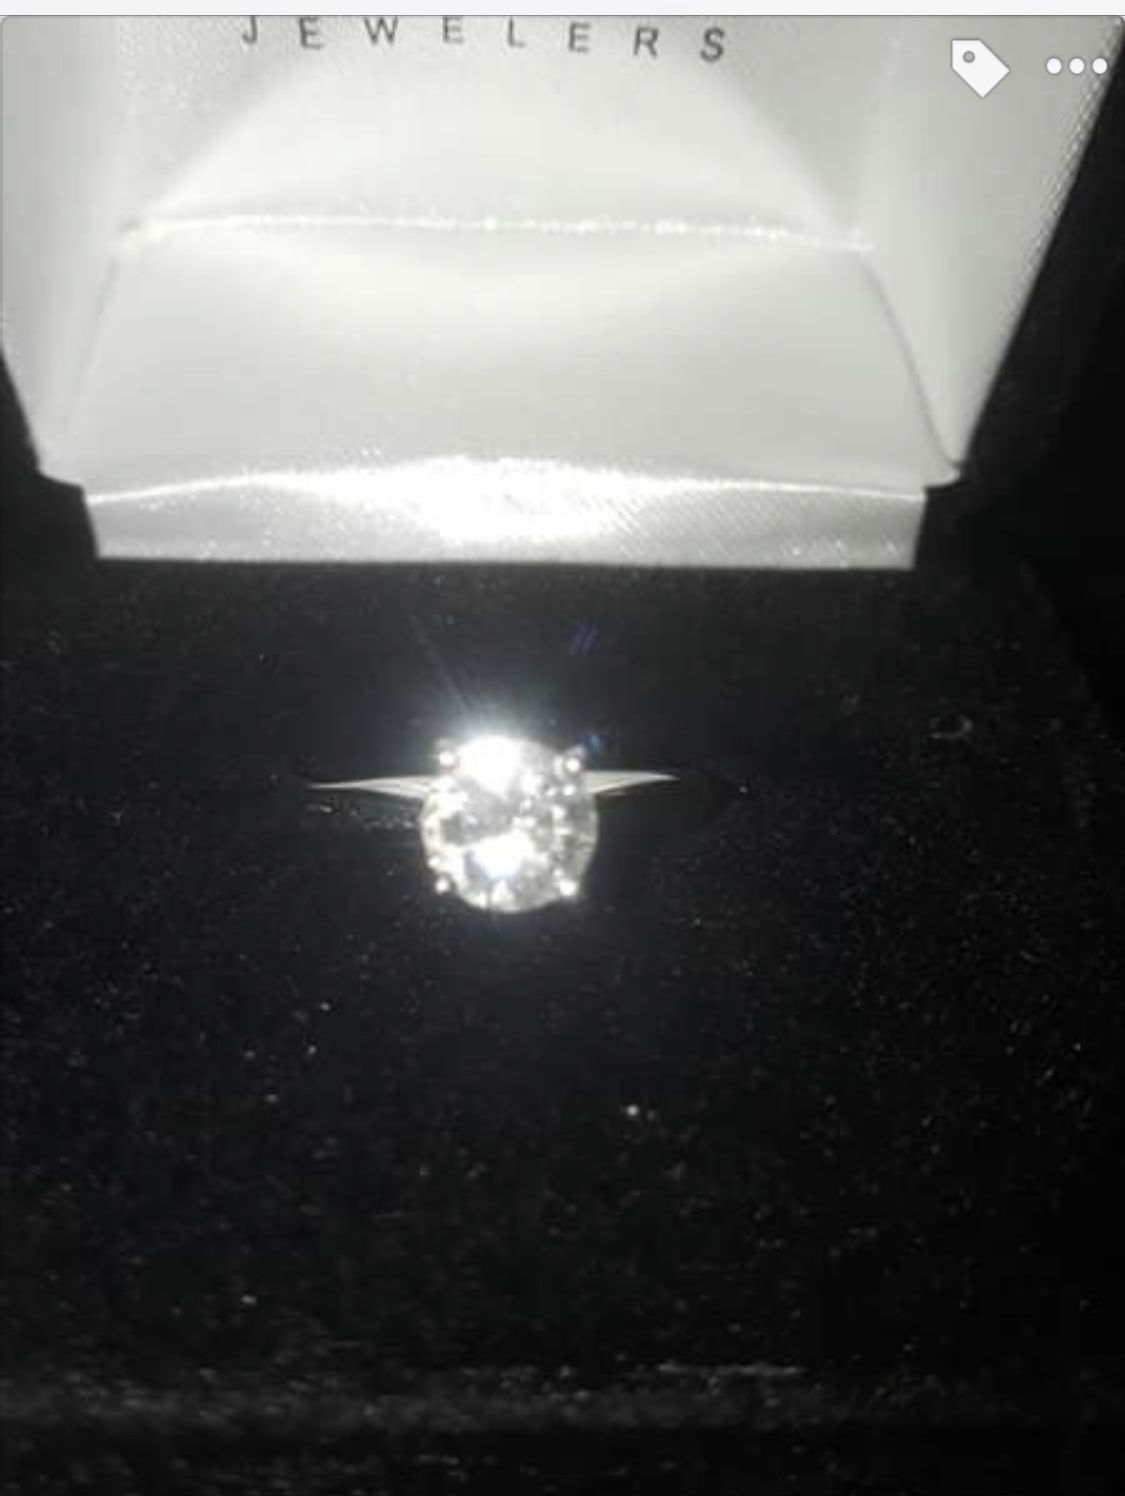 Solitaire Engagement wedding or promise ring .75 ct 14k white gold ring from Kay’s